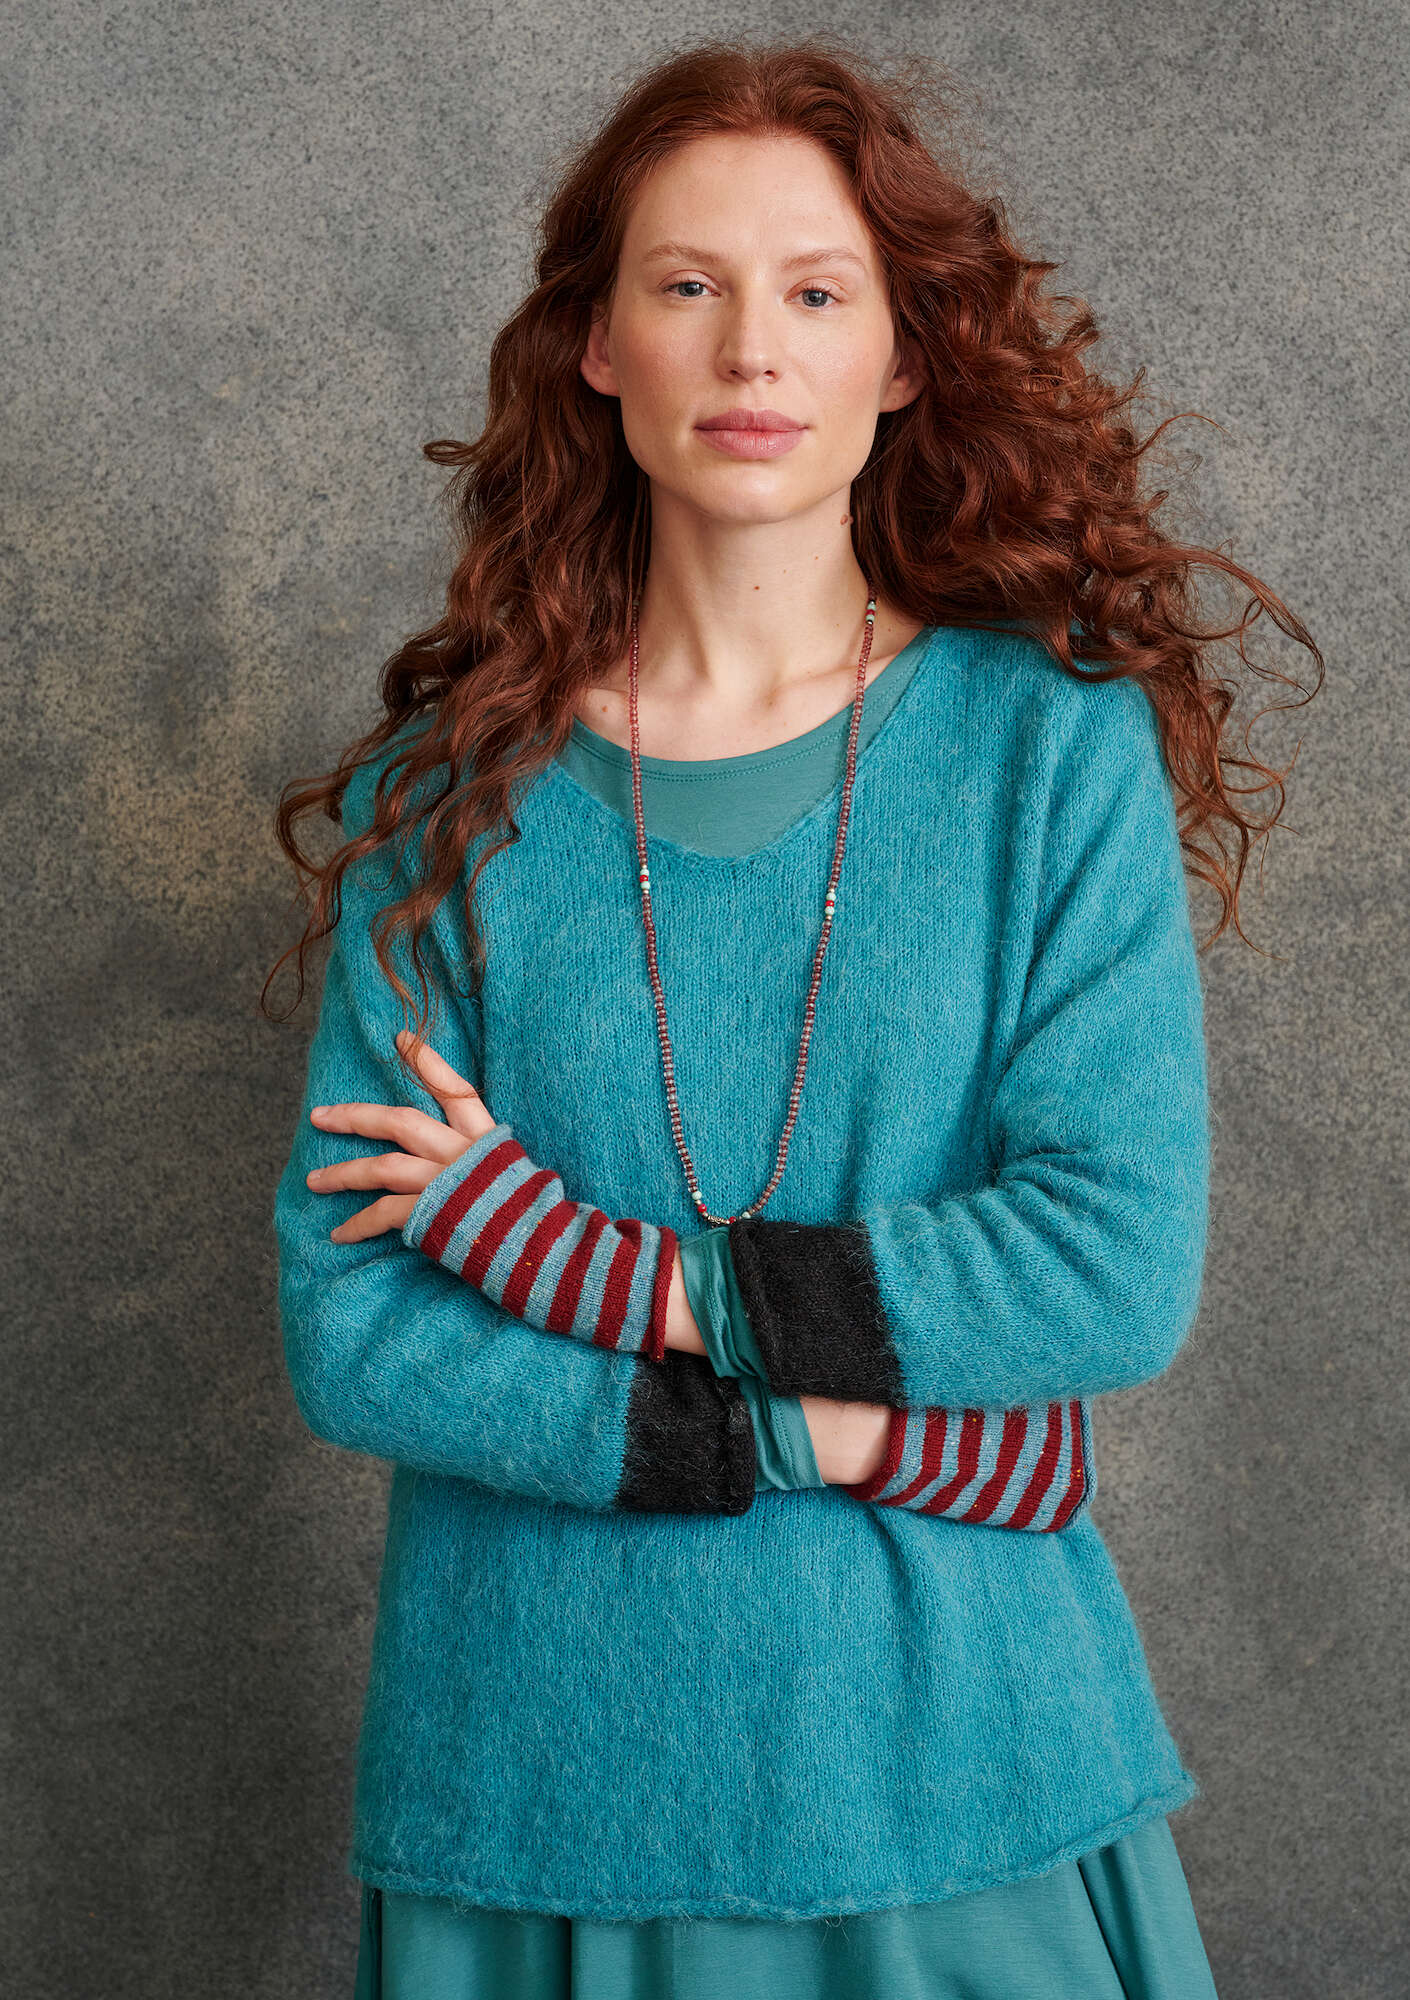 Sweater in an alpaca blend turquoise